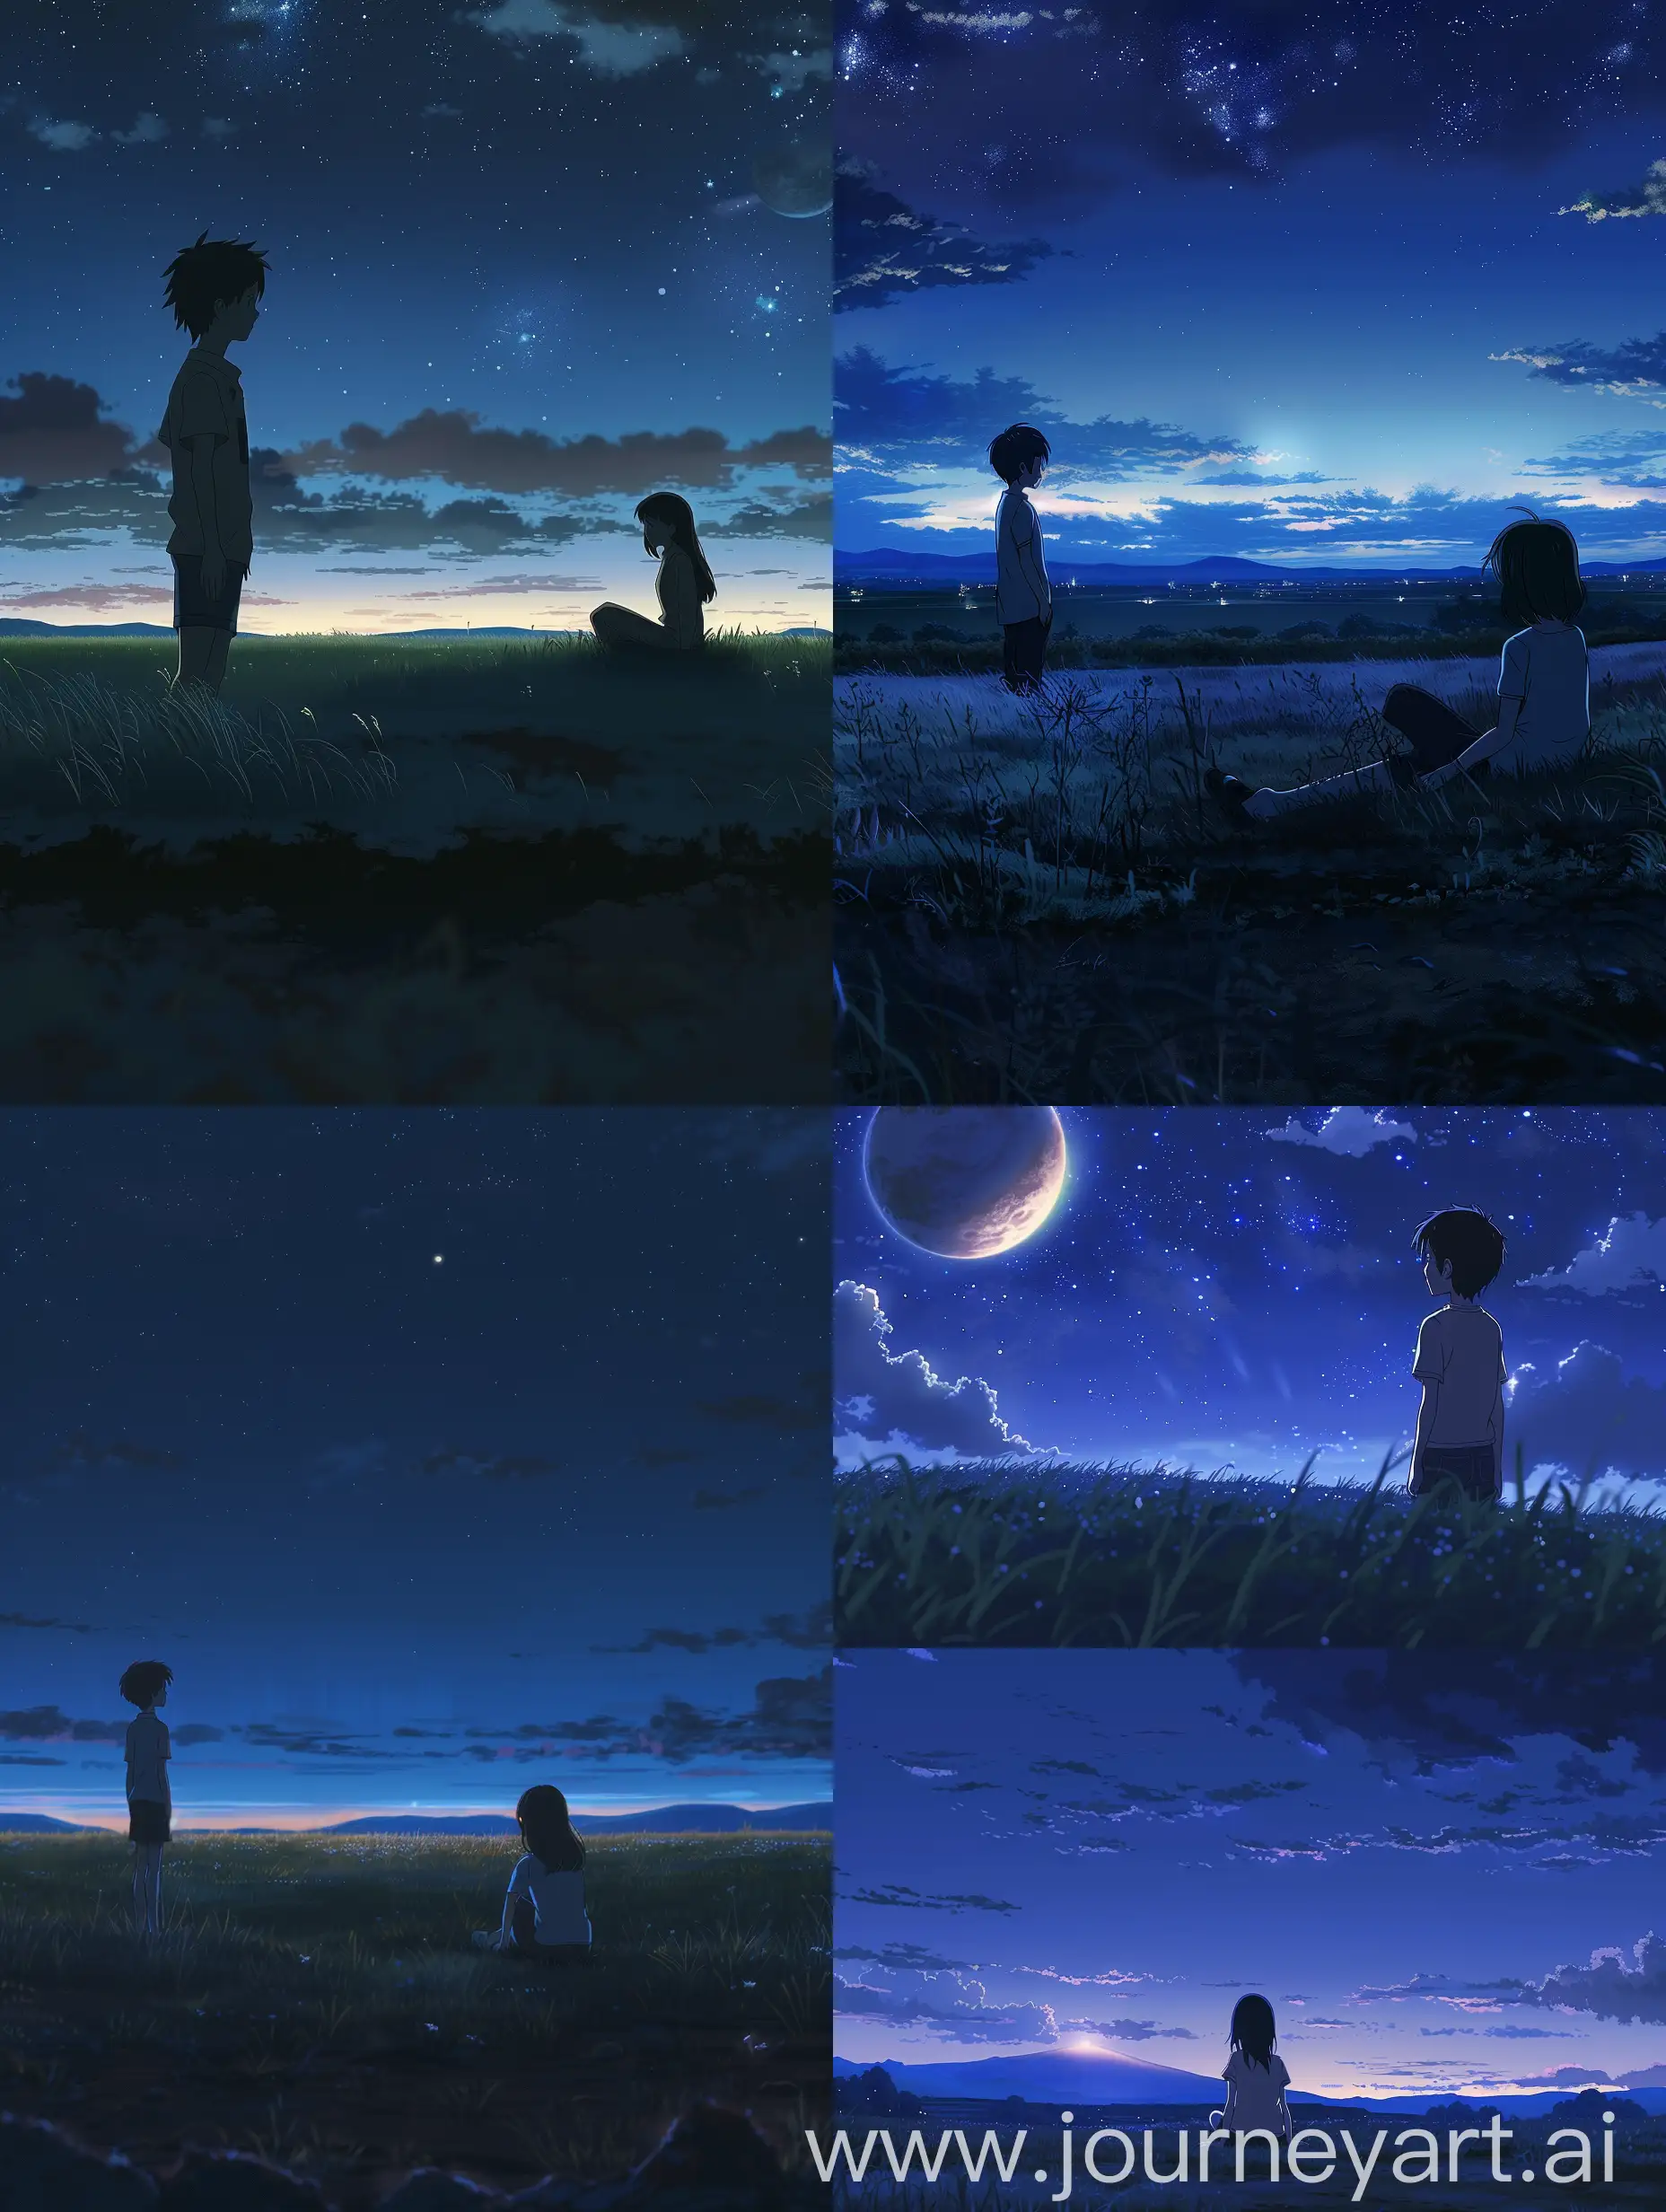 a boy standing in a plain field at night on another planet and A girl sitting on the grass at dusk earth, They see each other through time and space, But unable to contact, distant thoughts, Makoto Shinkai, Ghibli, Miyazaki Hayao